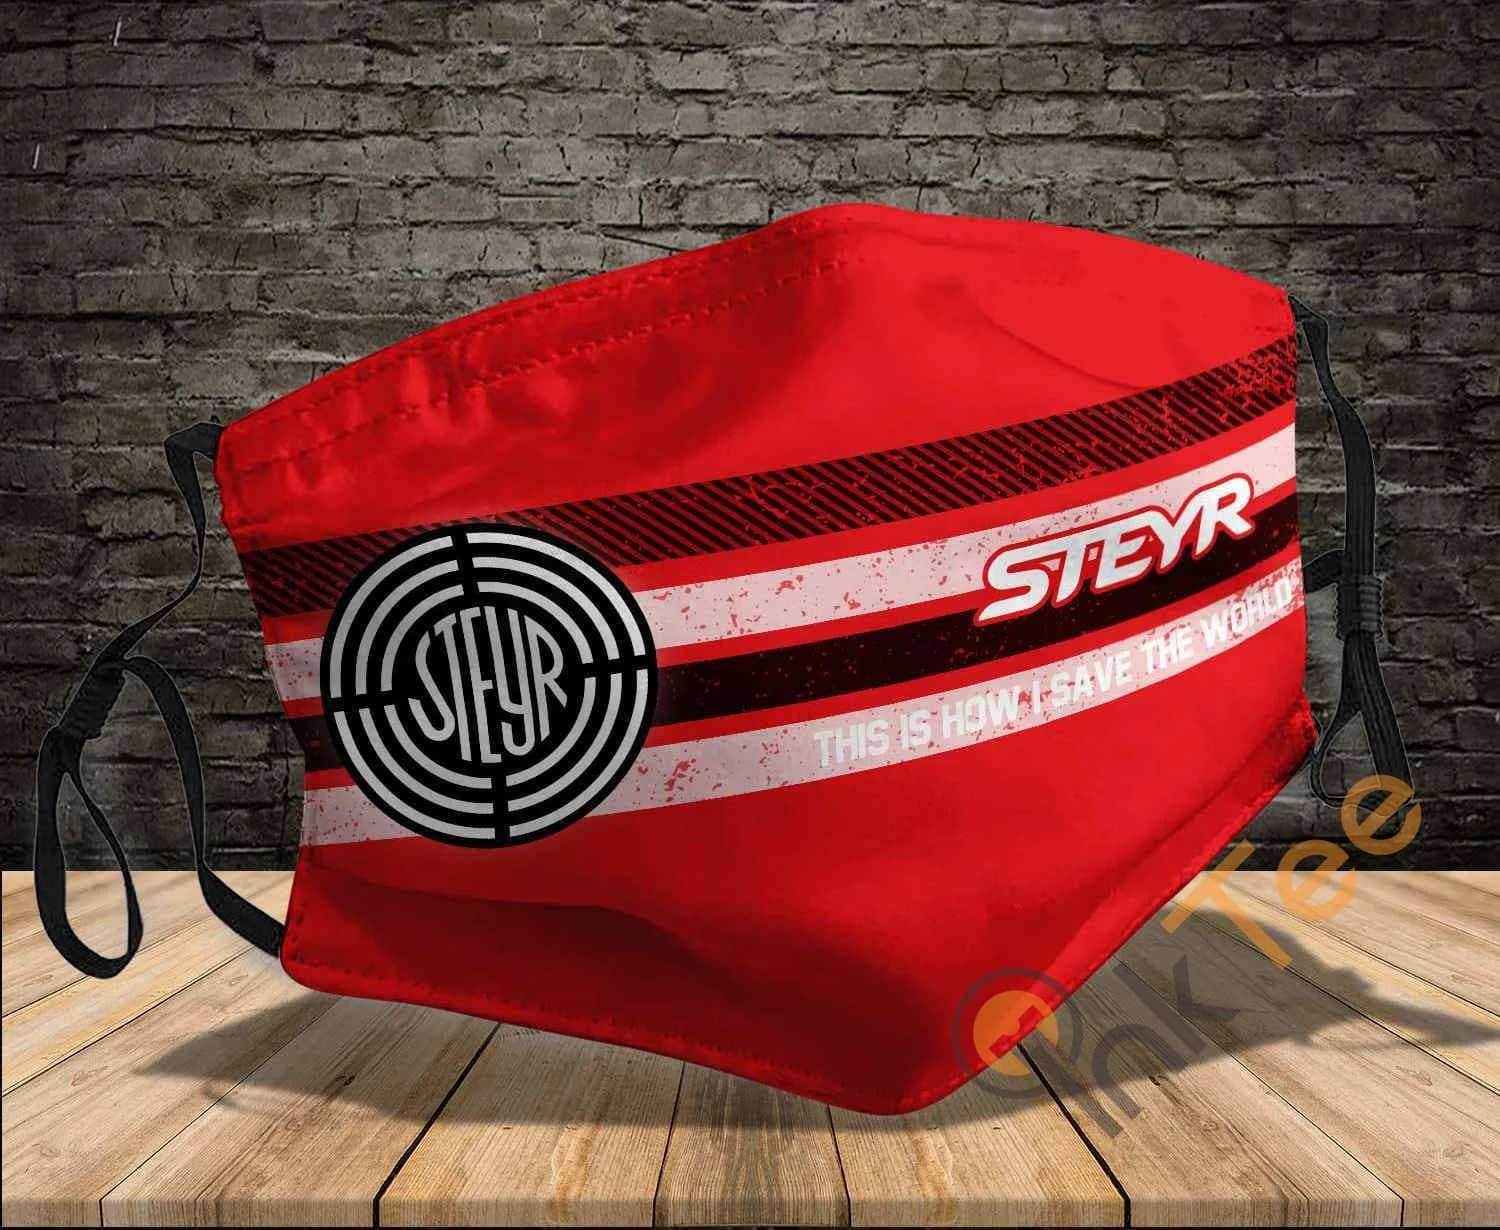 Steyr Tractor This Is How I Save The World Sku 1421 Amazon Best Selling Face Mask